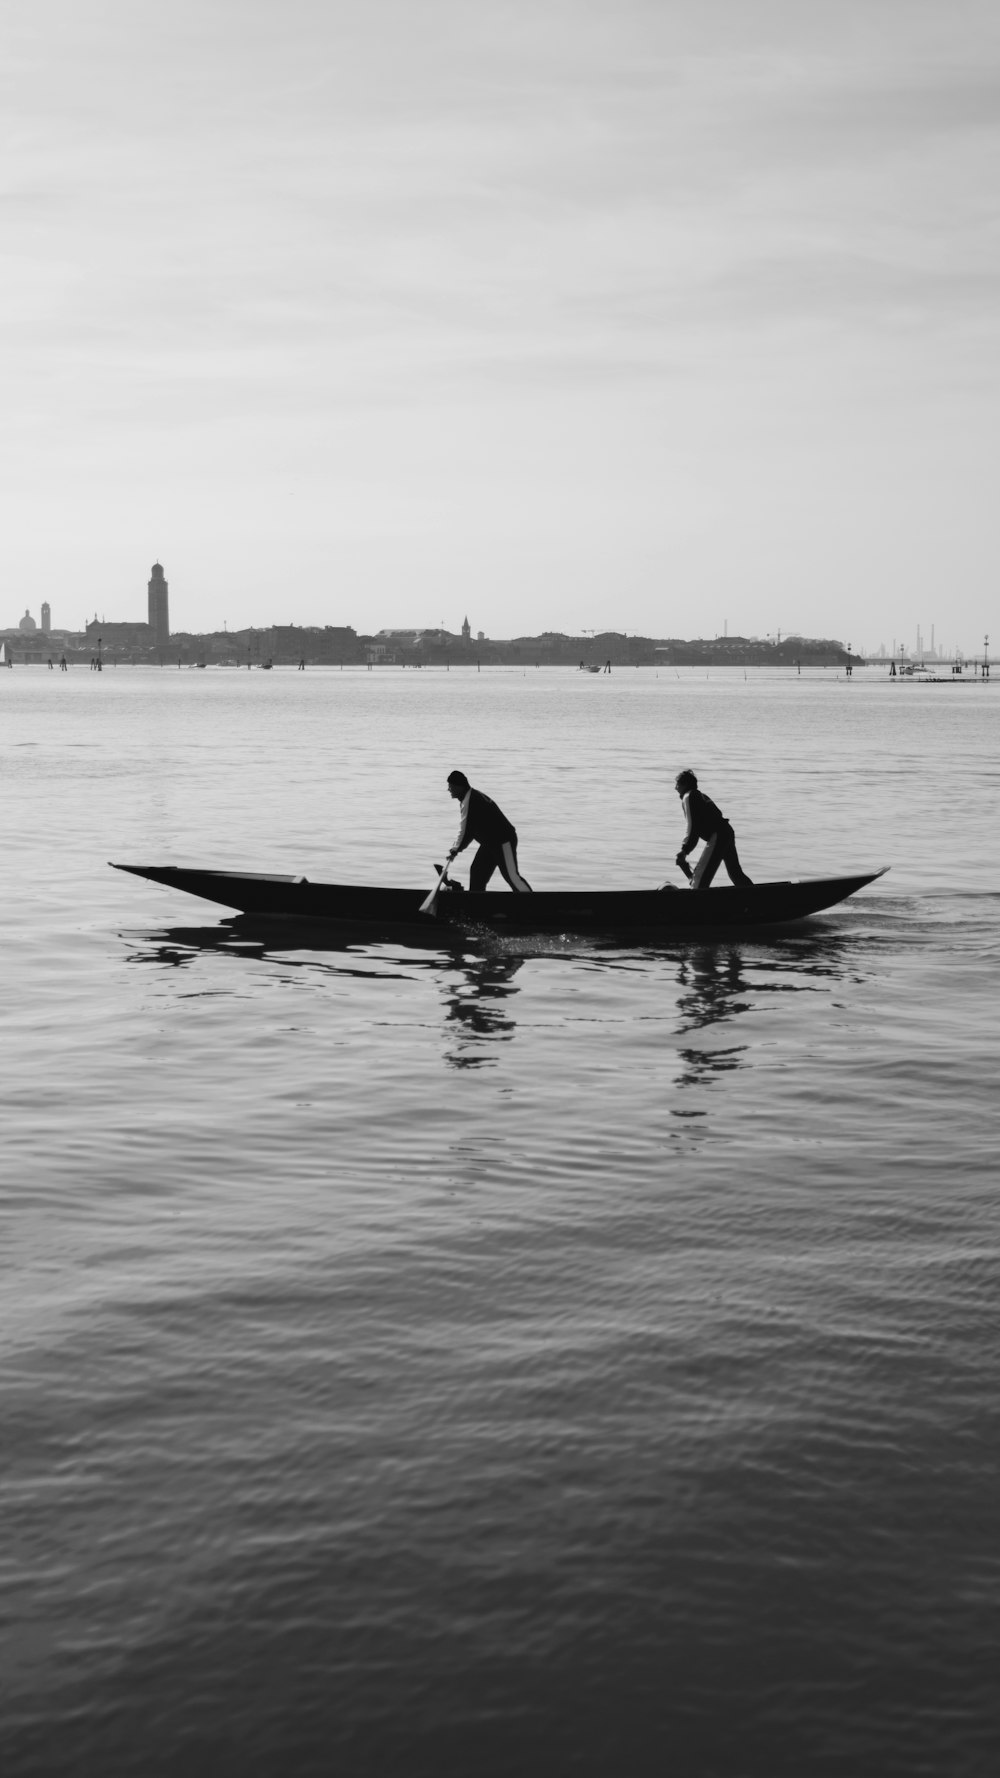 silhouette of 2 person riding on boat on water